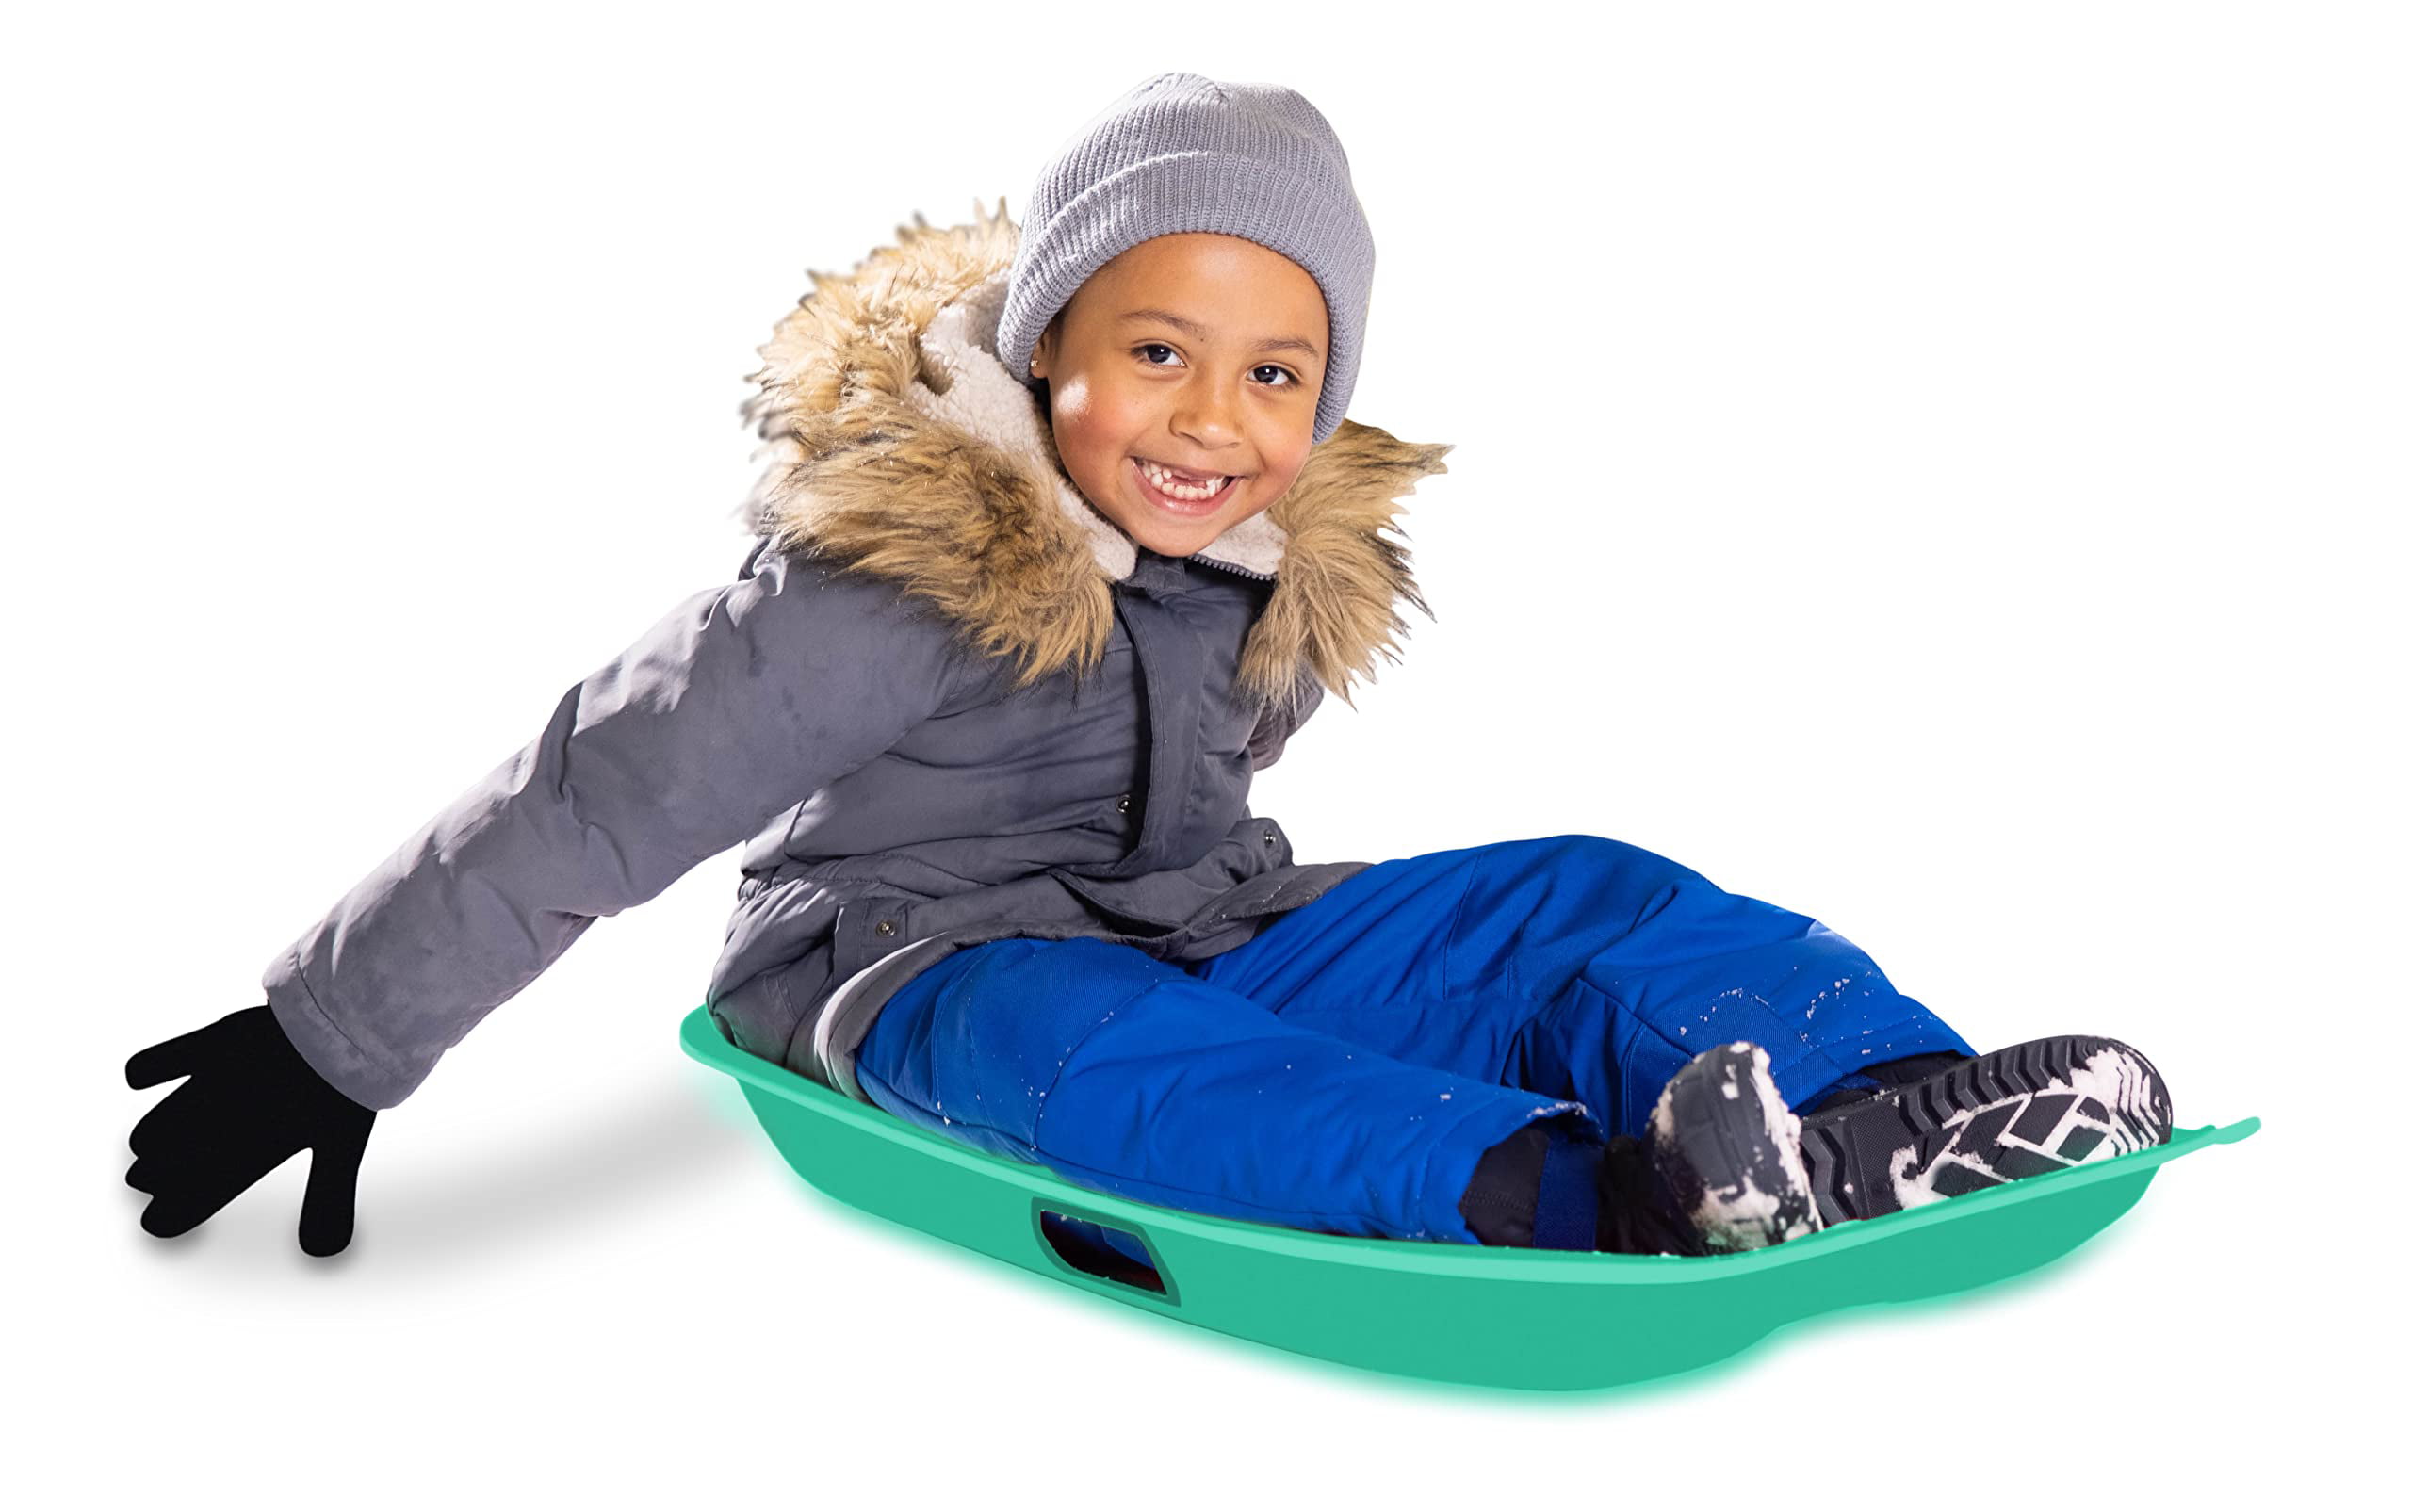 hookS Snow Sledge Lightweight Flexible Roll Up Sled Snowboards Durable And Strong Perfect Skiing Board Toy For Children Adult Snow Toboggan Sled Carpet With 2 Punched Out Handles 